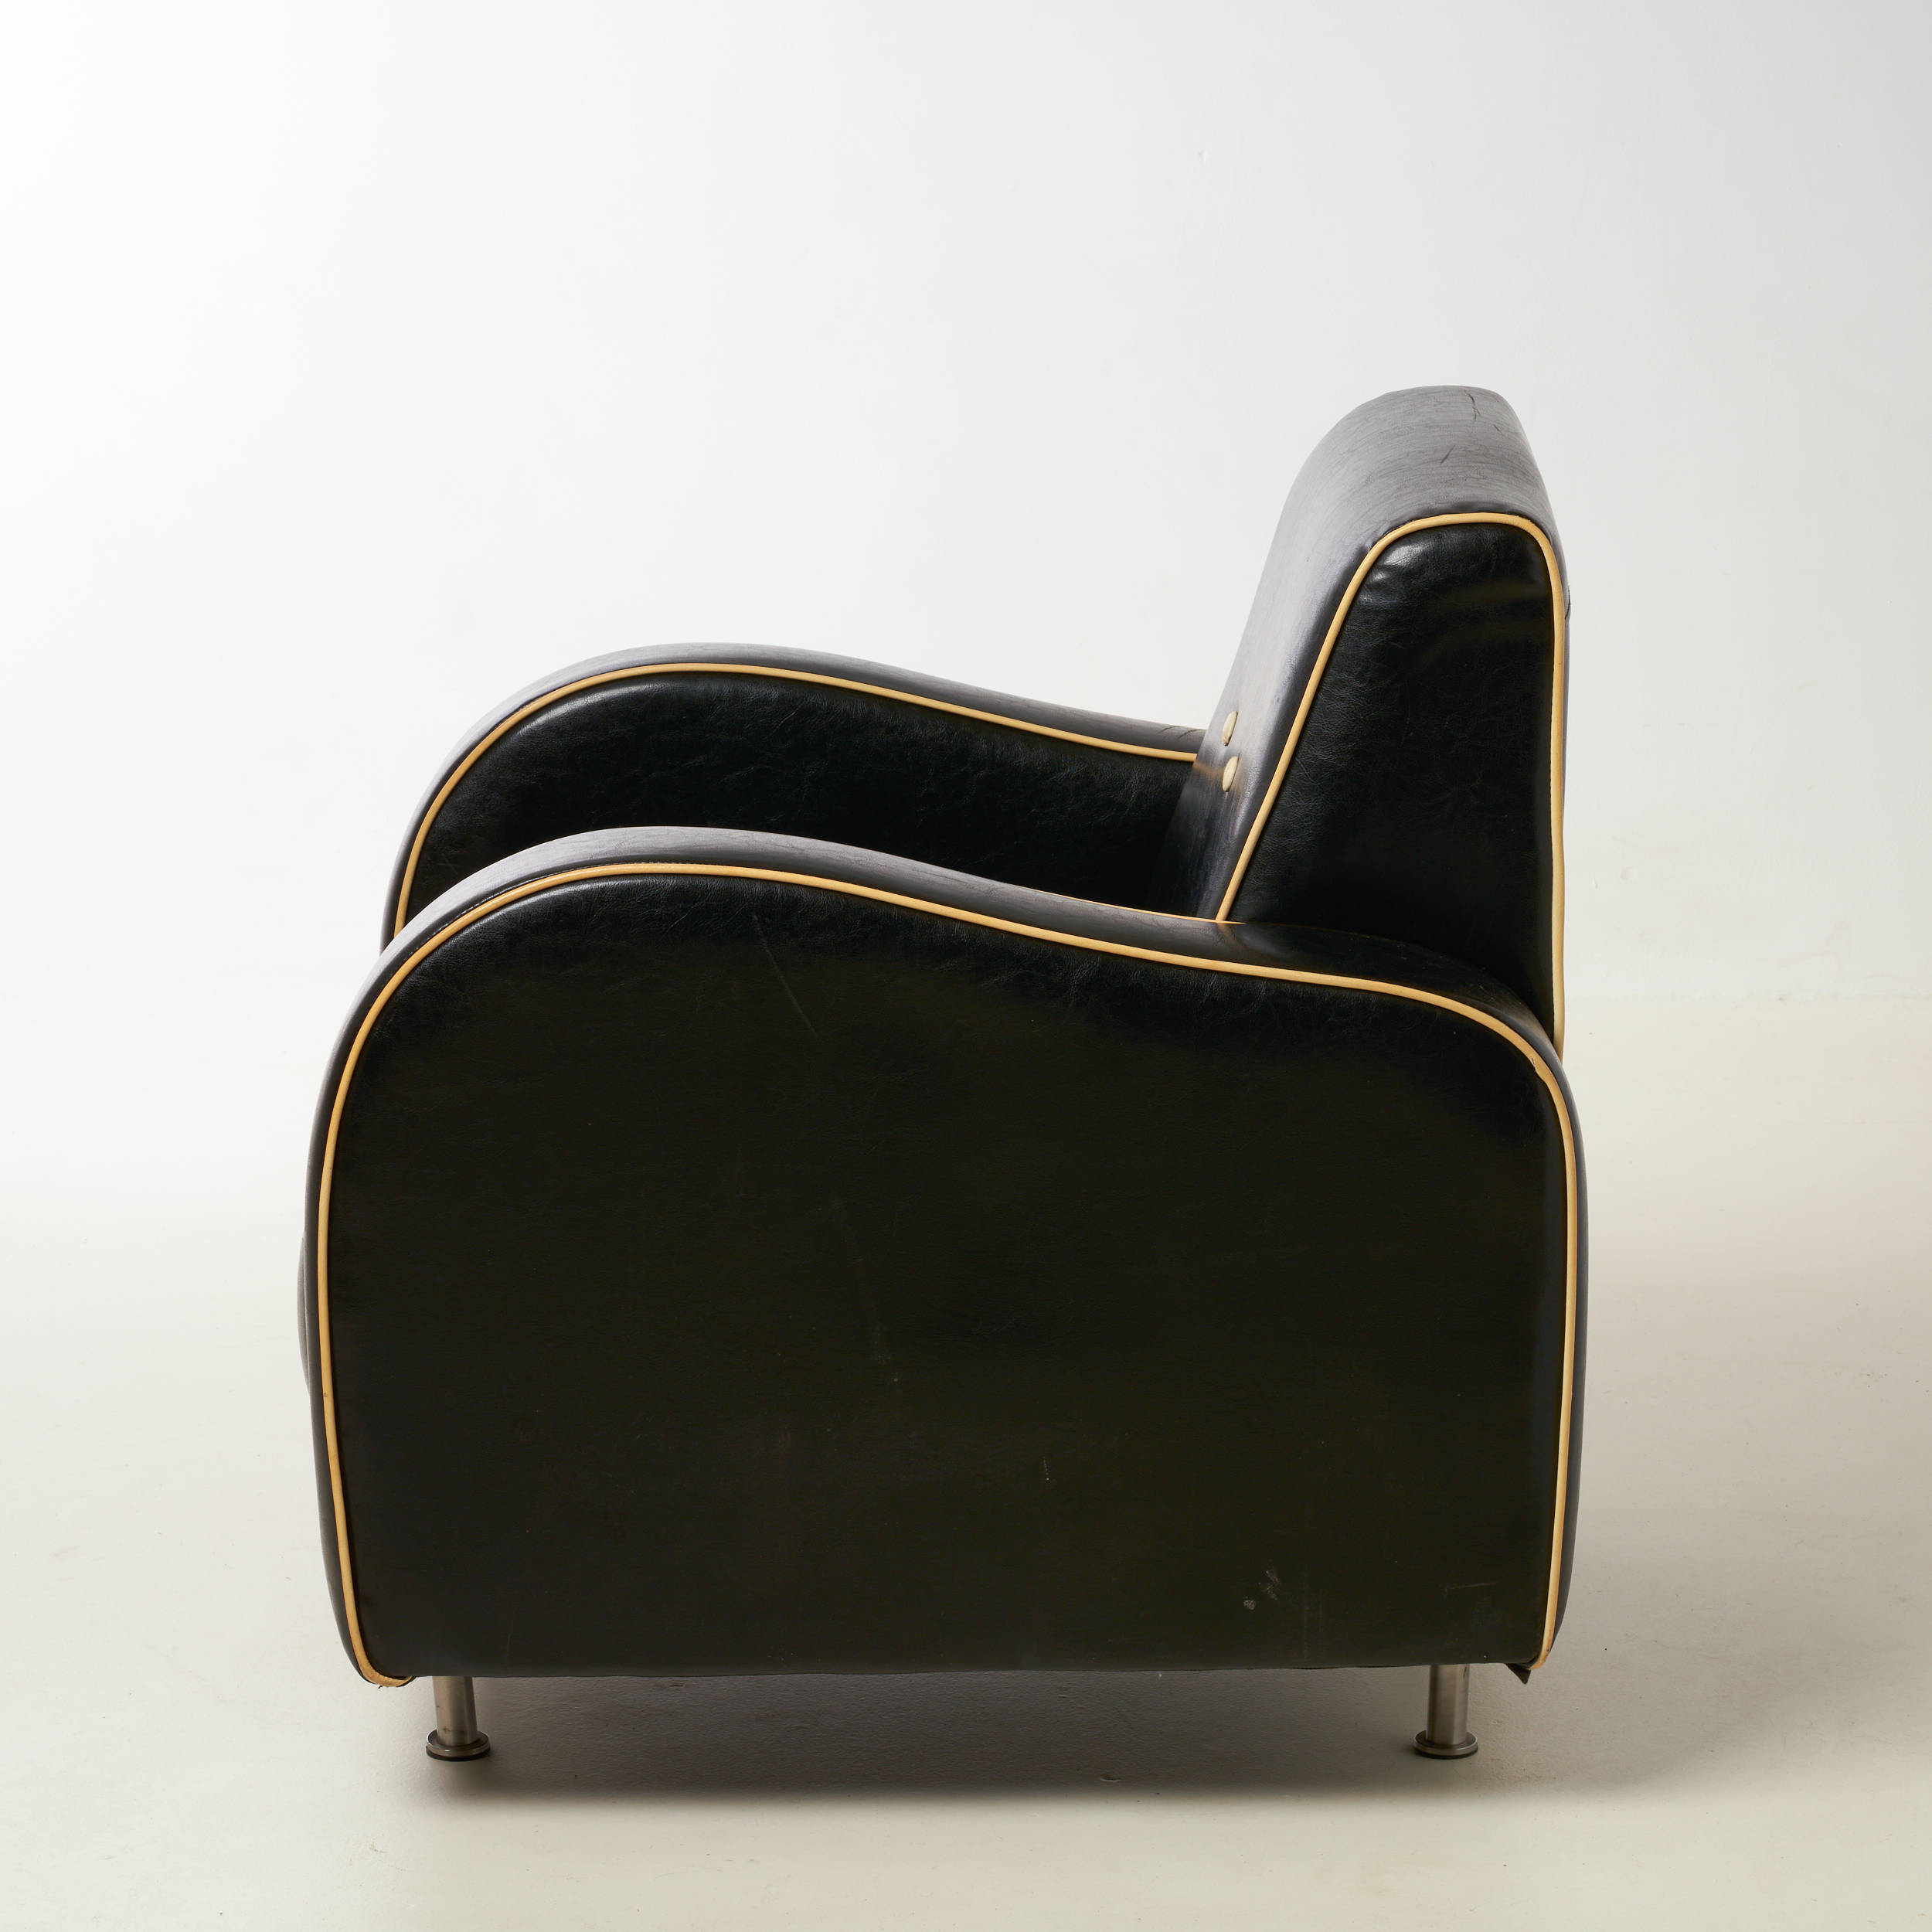 VINTAGE AND VERY DECORATIVE ARMCHAIR IN BLACK LEATHER, 1950 - 1960s